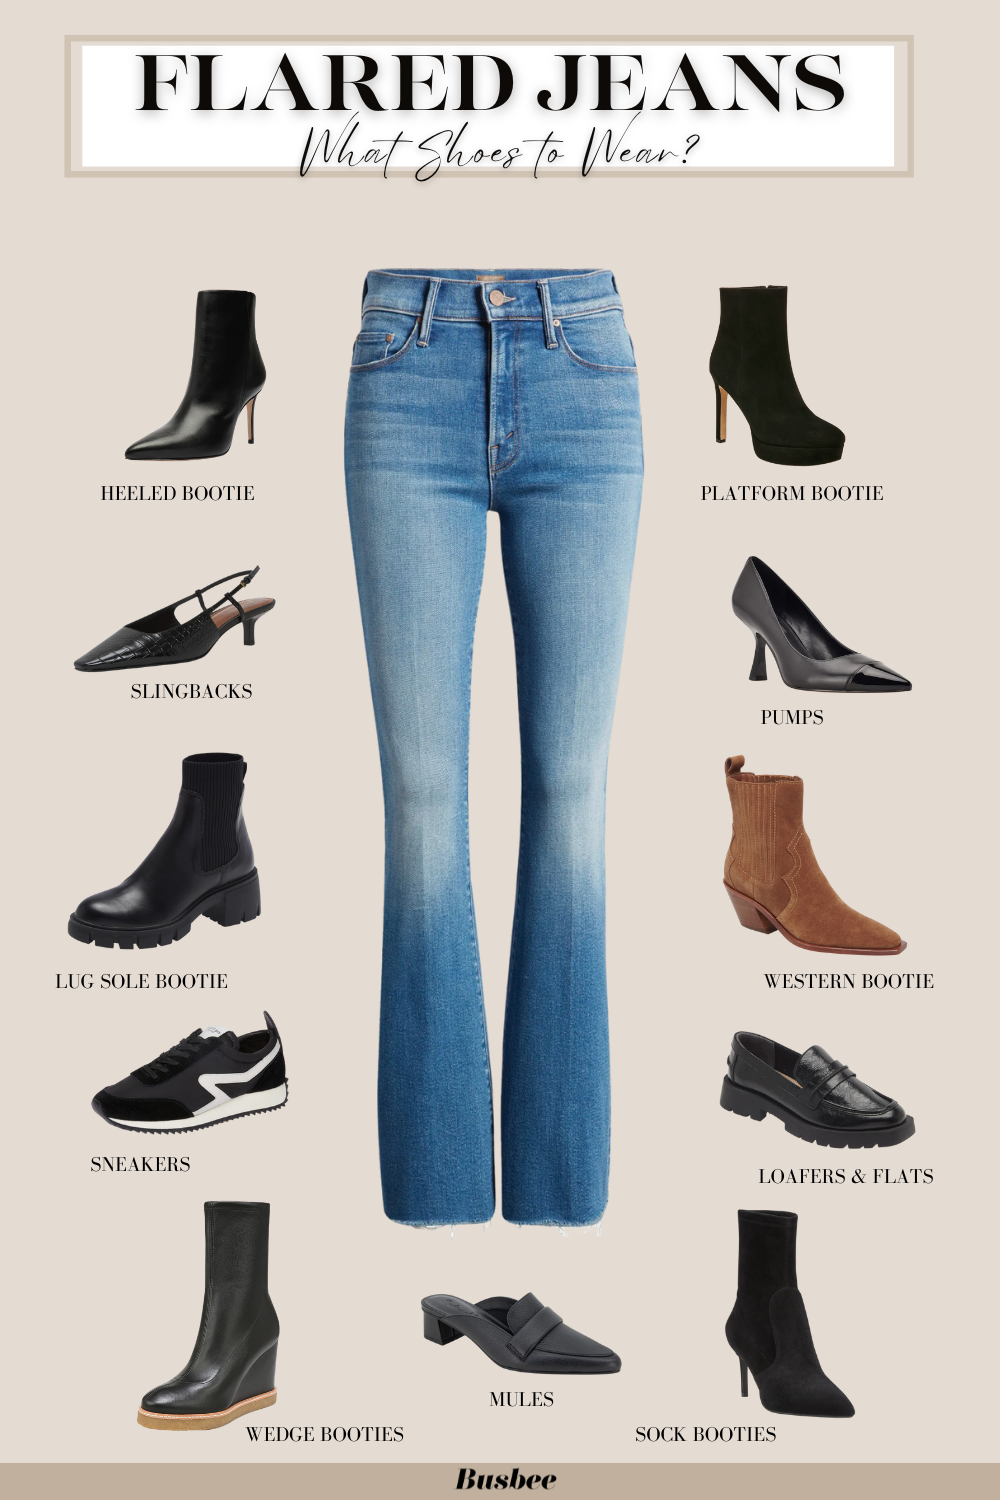 What shoes and boots to wear with flared jeans